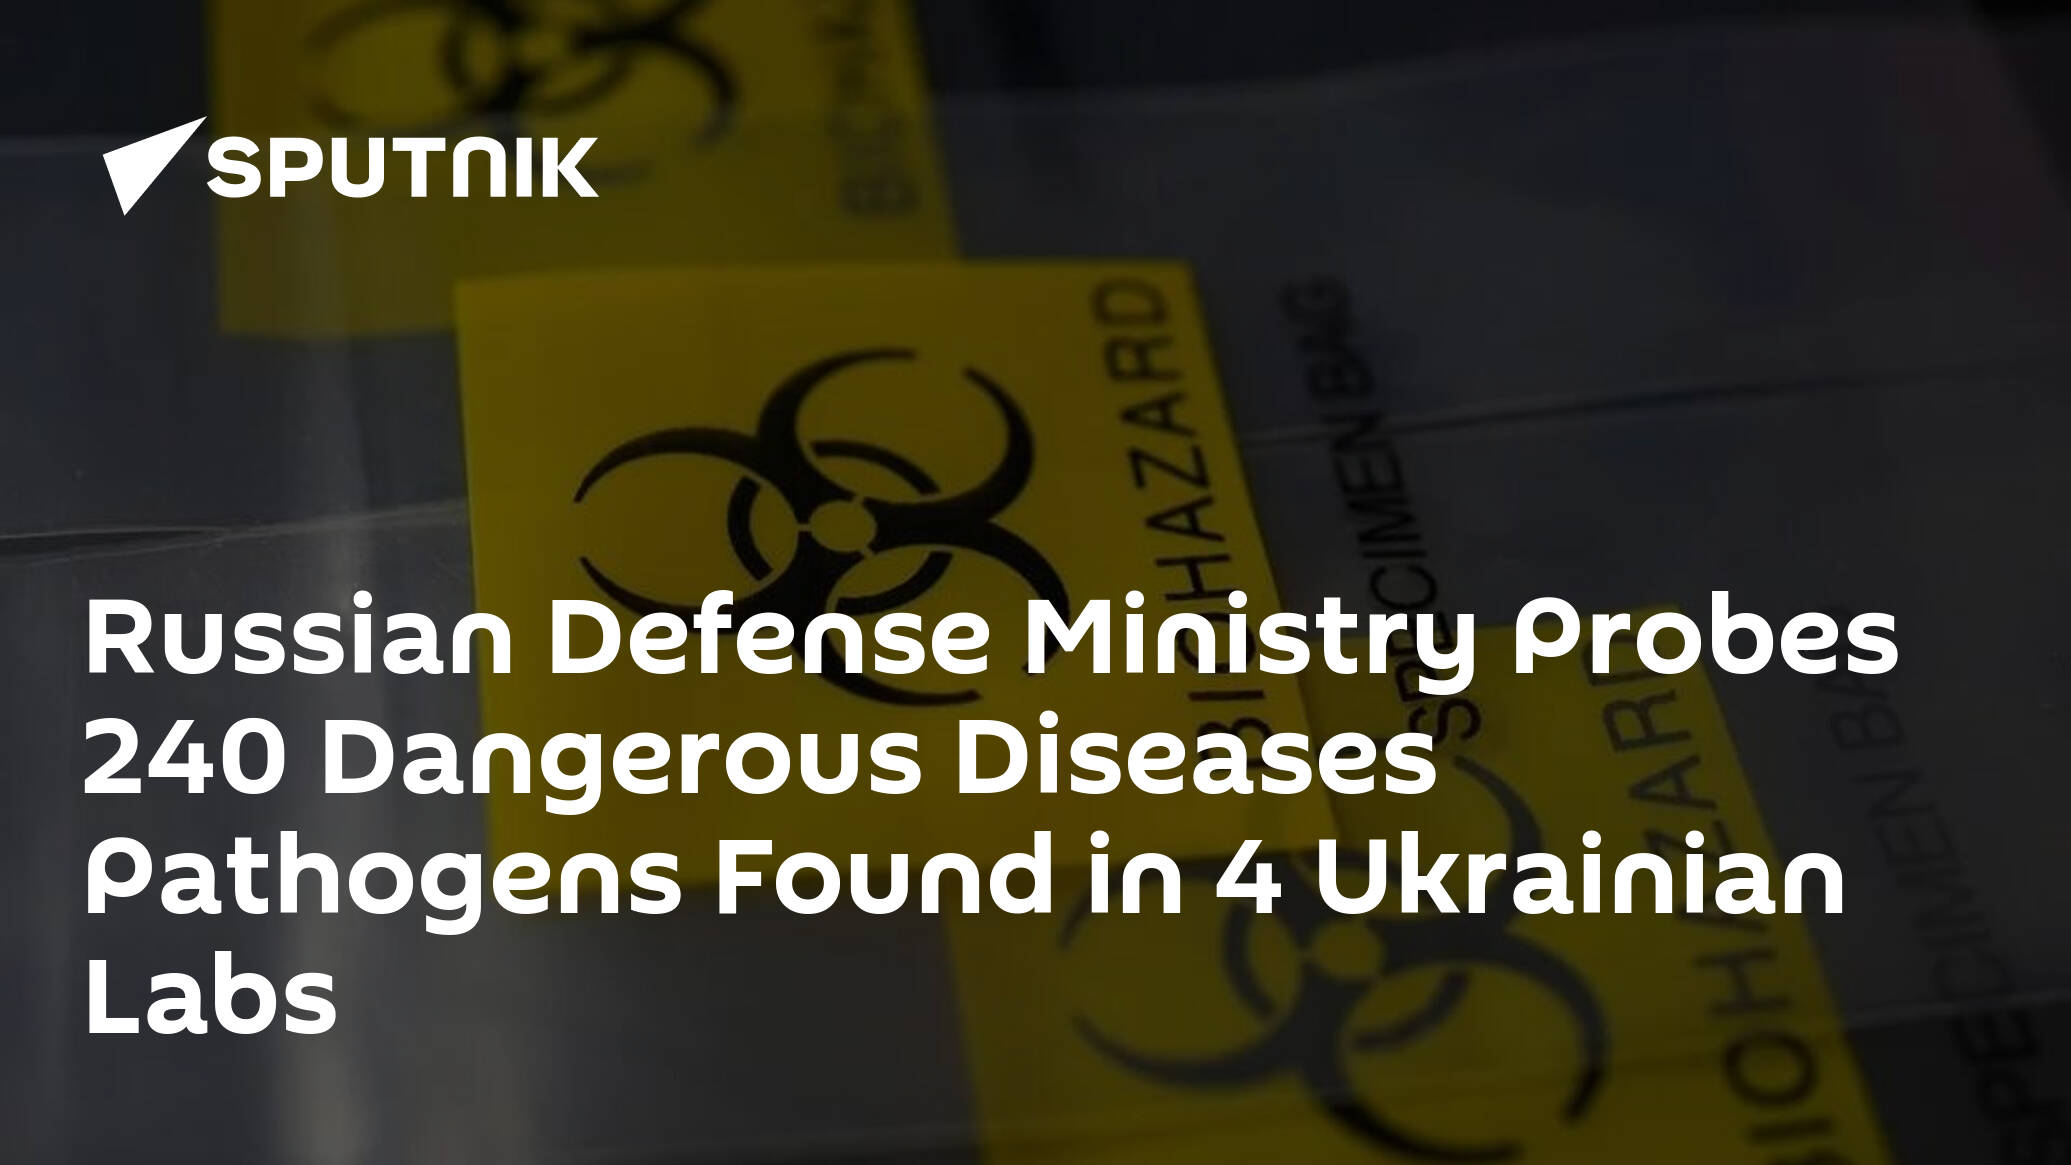 Russian Defense Ministry Probes 240 Dangerous Diseases Pathogens Found in 4 Ukrainian Labs